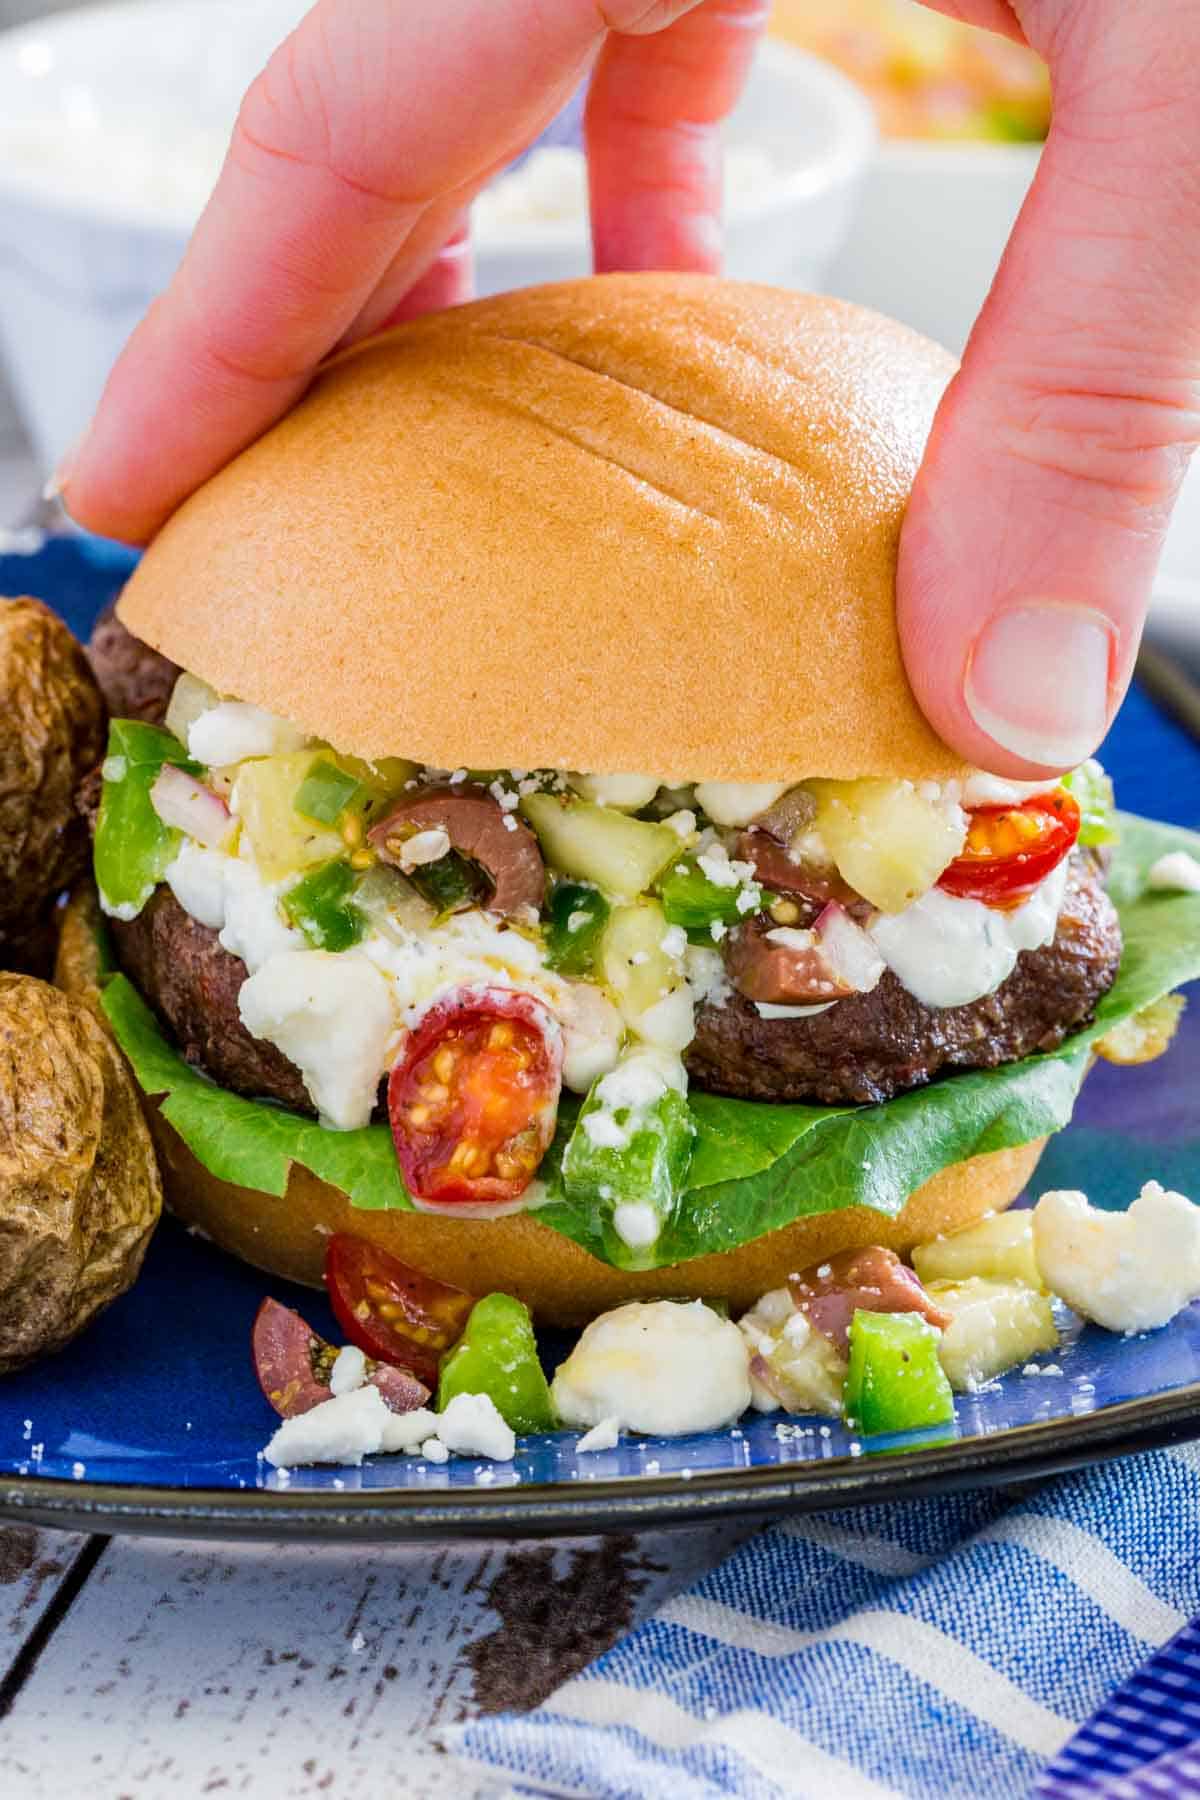 A hand putting a the top of a bun on a burger with tzatziki and Greek salad topping.